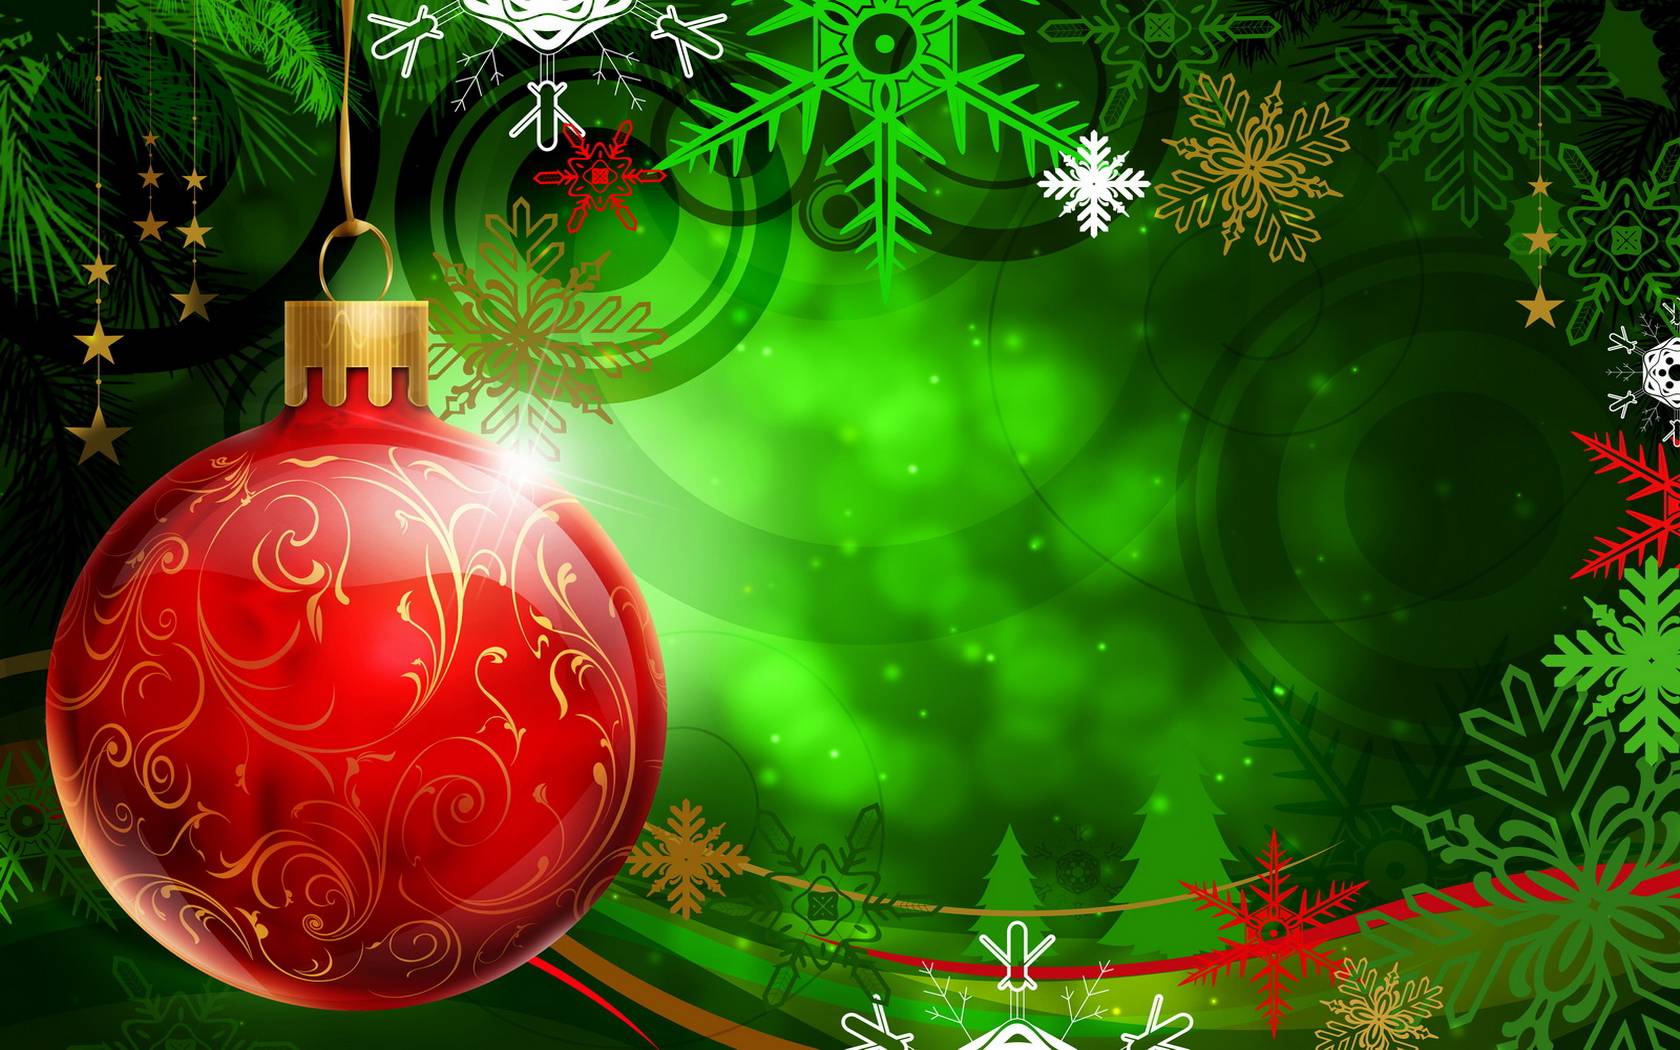 High Resolution Christmas Desktop Backgrounds Wallpapers Records